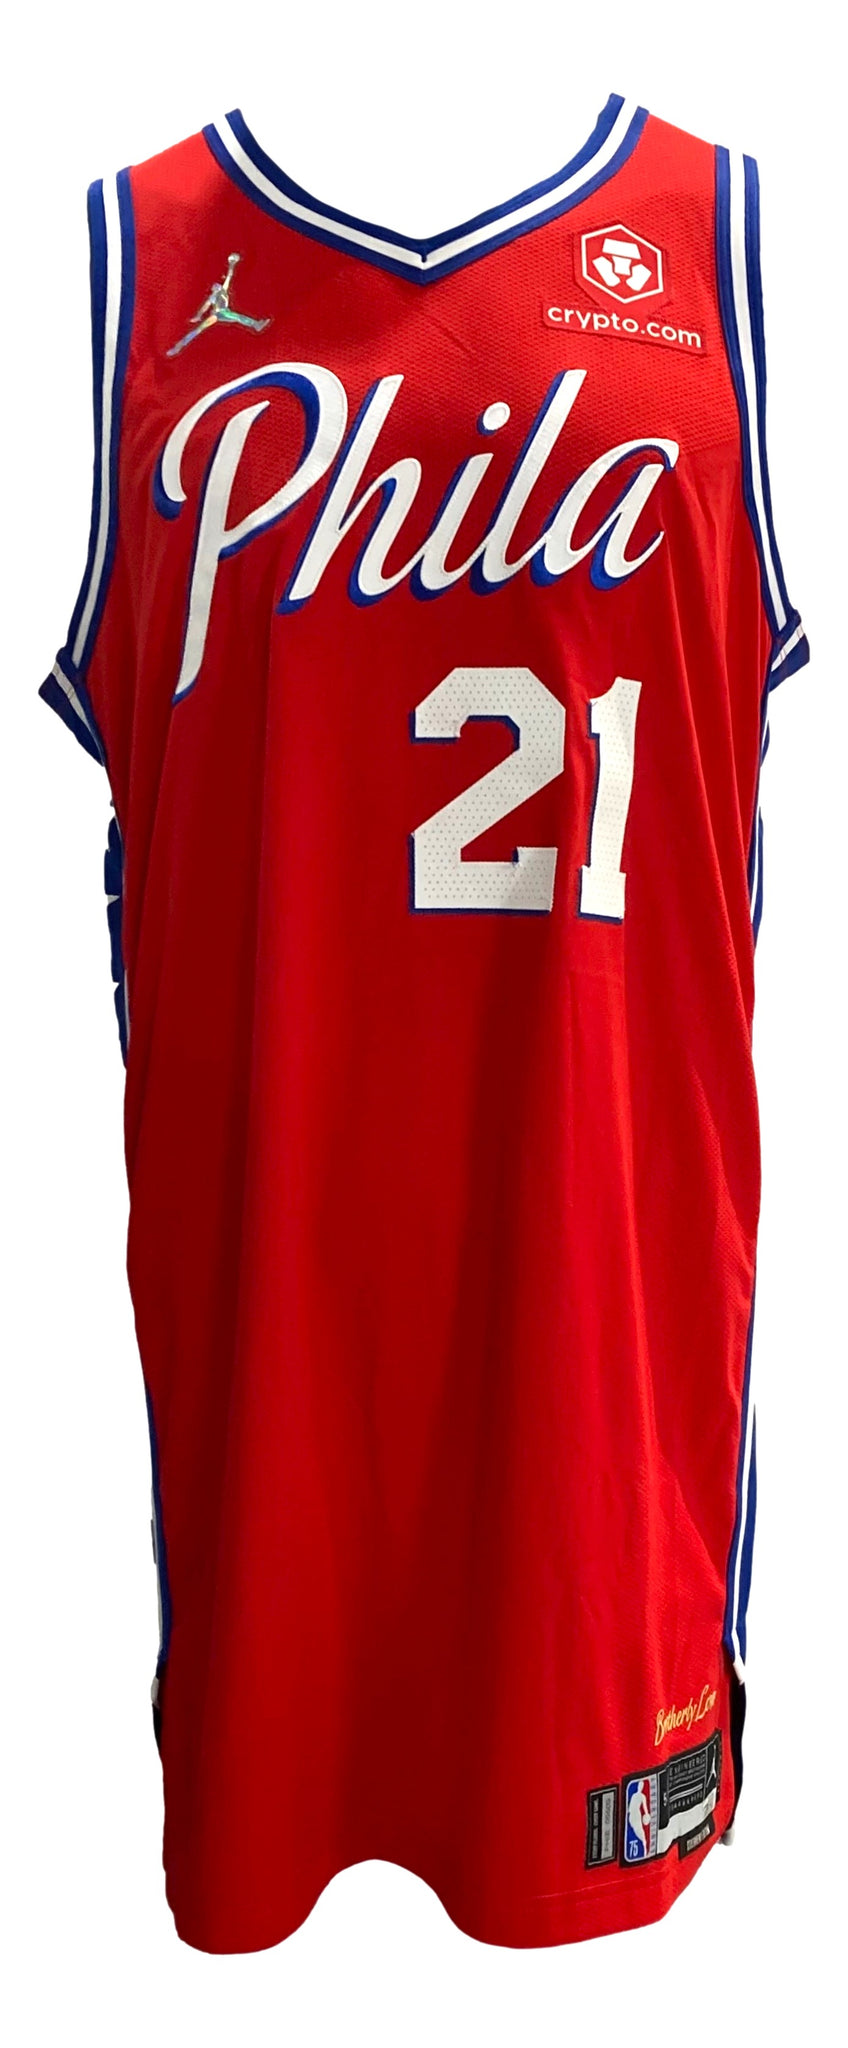 Detroit Pistons Number 8 Game Used Warm Up Jersey - NBA Game Used Jerseys  at 's Sports Collectibles Store